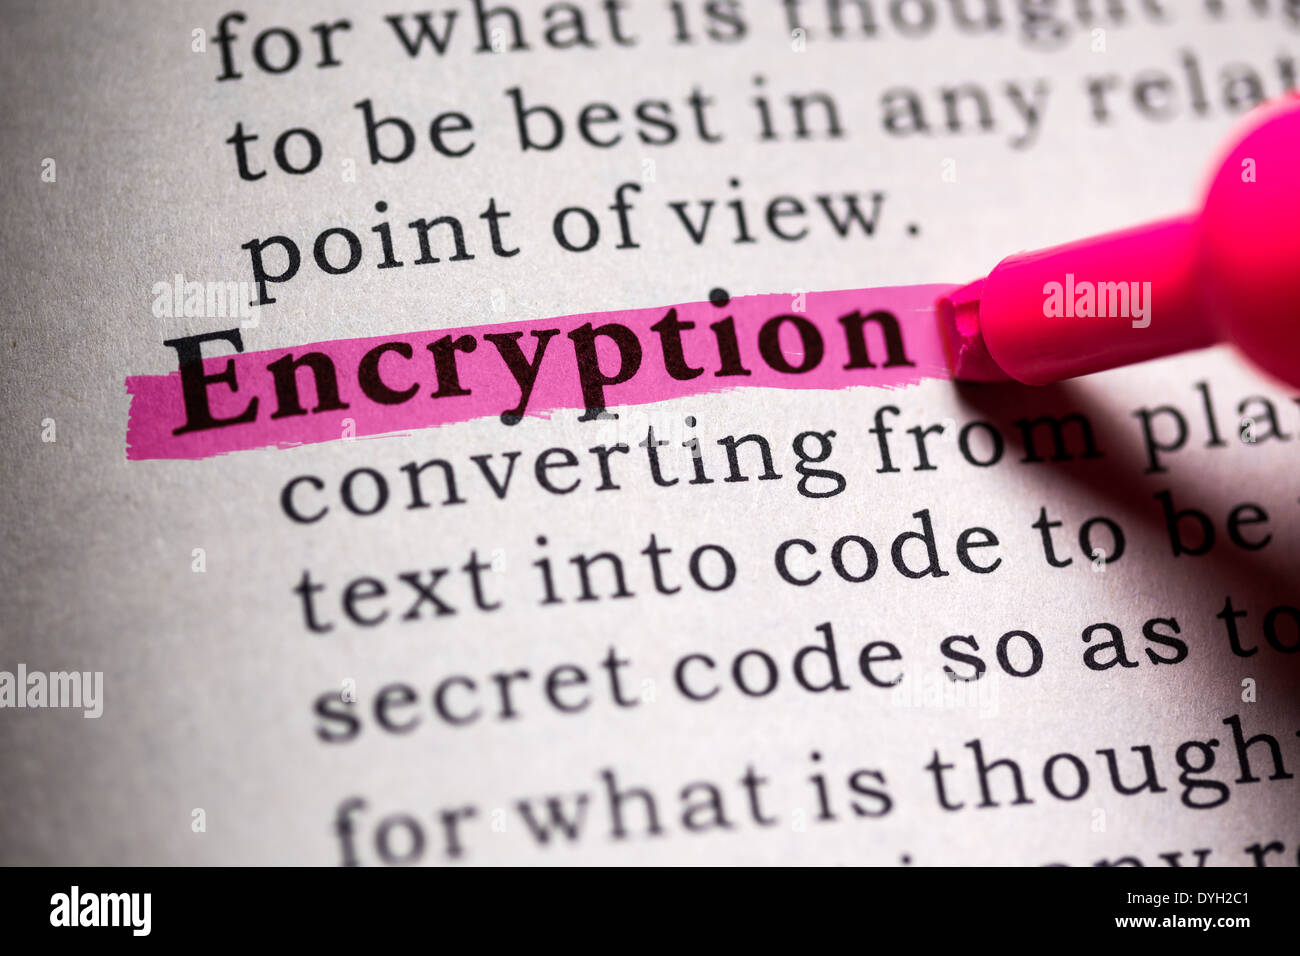 Fake Dictionary, Dictionary definition of the word encryption. Stock Photo